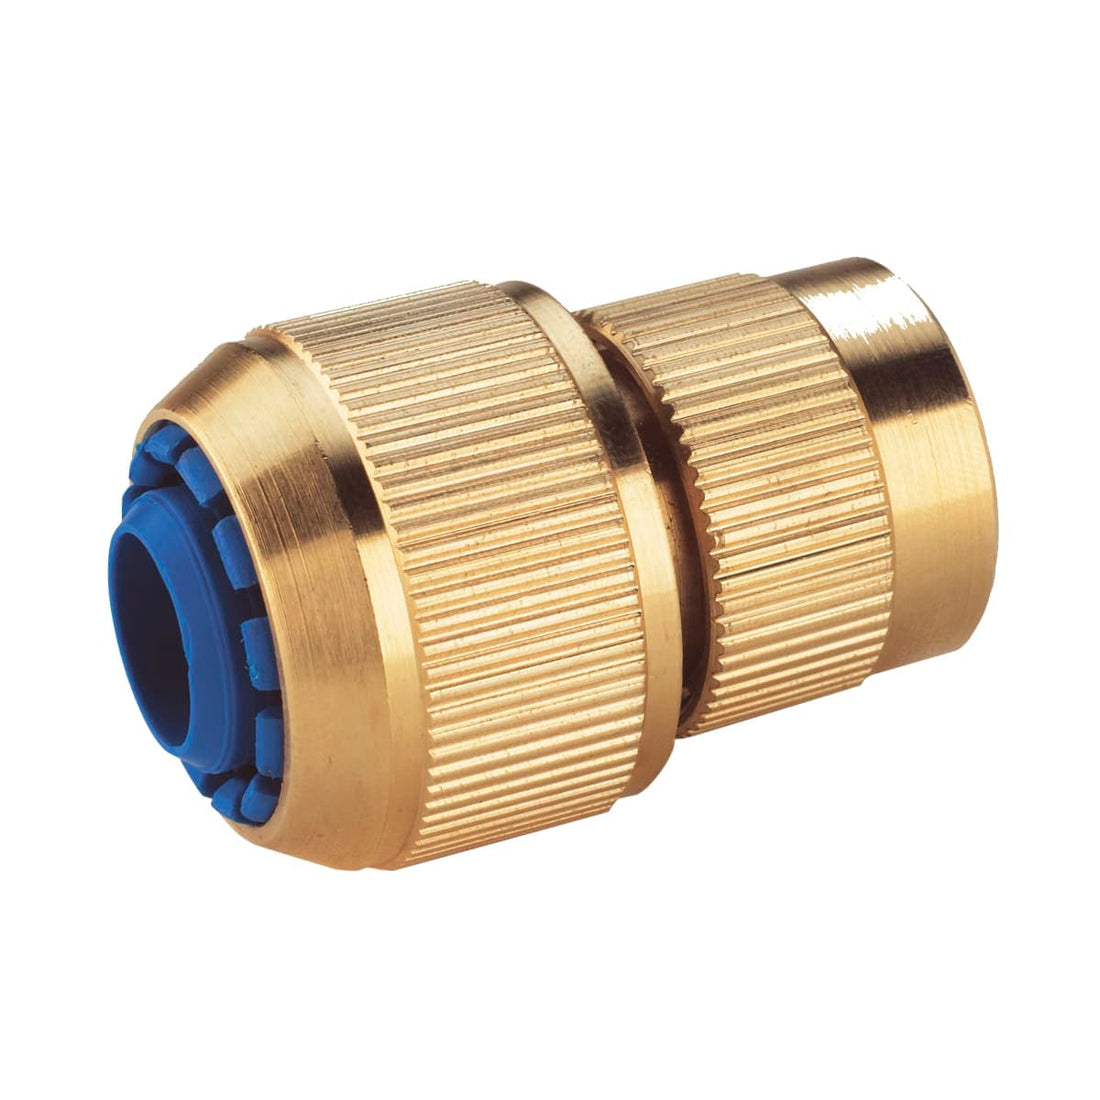 BRASS QUICK COUPLING FOR 19 MM DIAMETER PIPES COLORTAP - best price from Maltashopper.com BR500410127